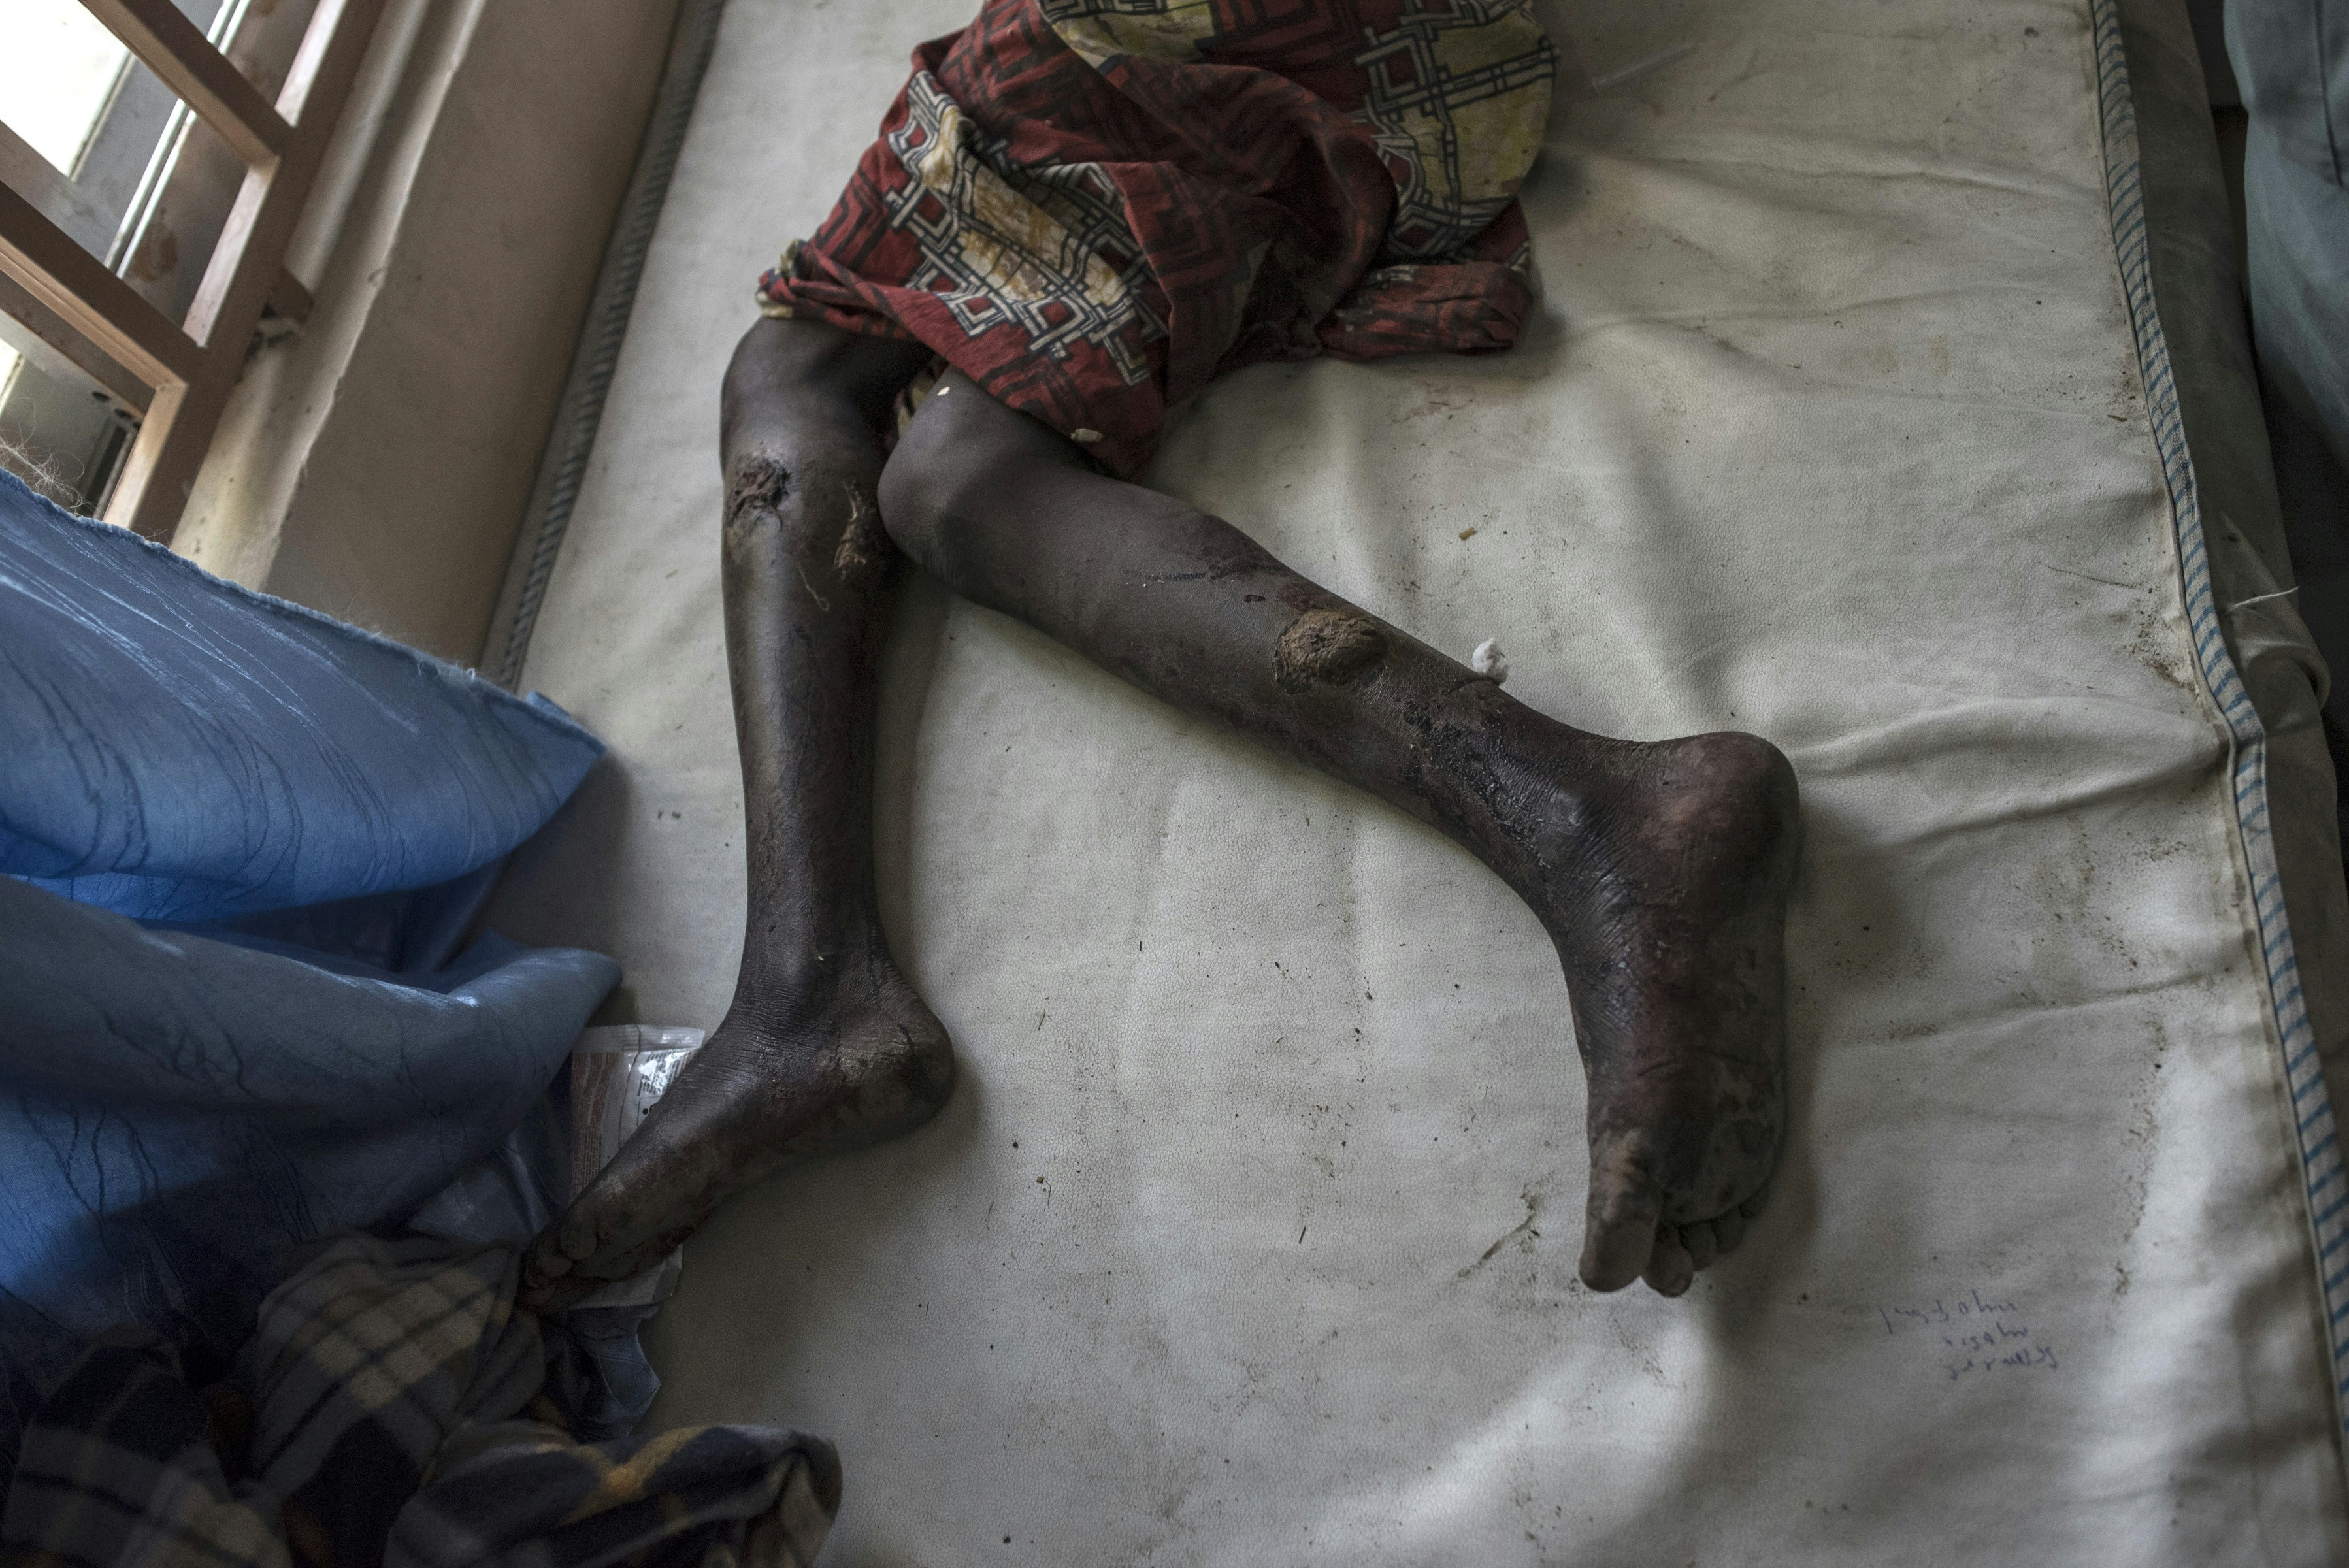 A wounded girl lies on a hospital bed at the Maiduguri State Specialist Hospital on January 18, 2017.At least 70 people have died in an IDP camp in Borno State from an accidental military airstrike on January 17, 2017, intended to target Boko Haram militants in Rann, in north-eastern Nigeria. / AFP / STEFAN HEUNIS (Photo credit should read STEFAN HEUNIS/AFP via Getty Images)